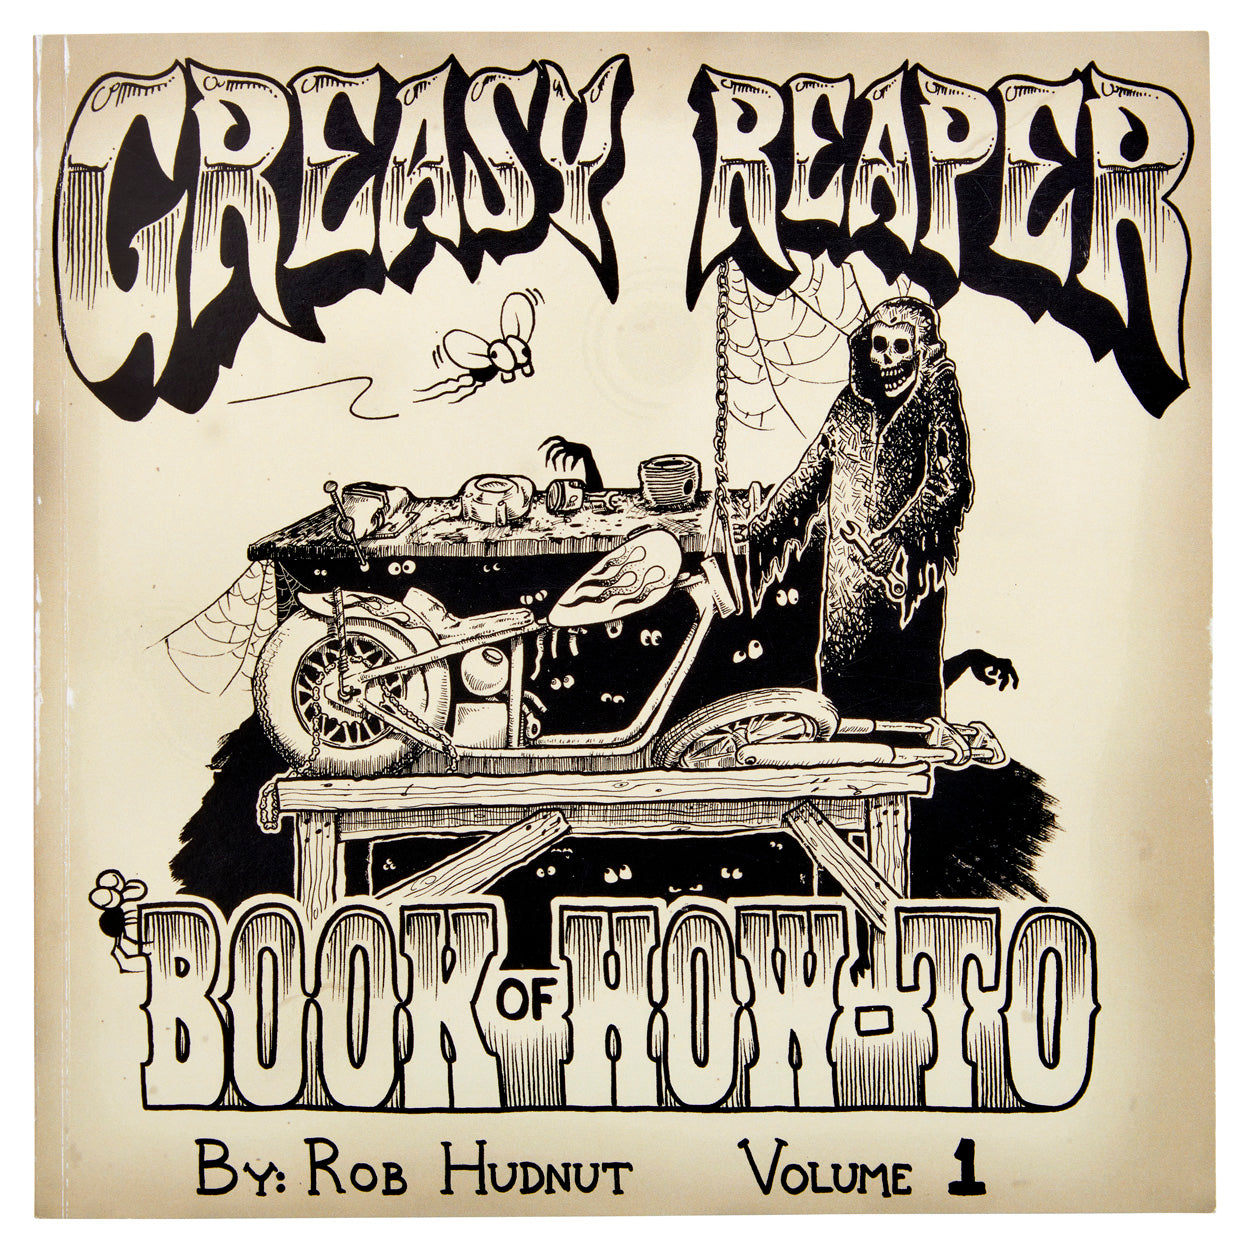 Greasy Reaper Book of How-To - Volume 1